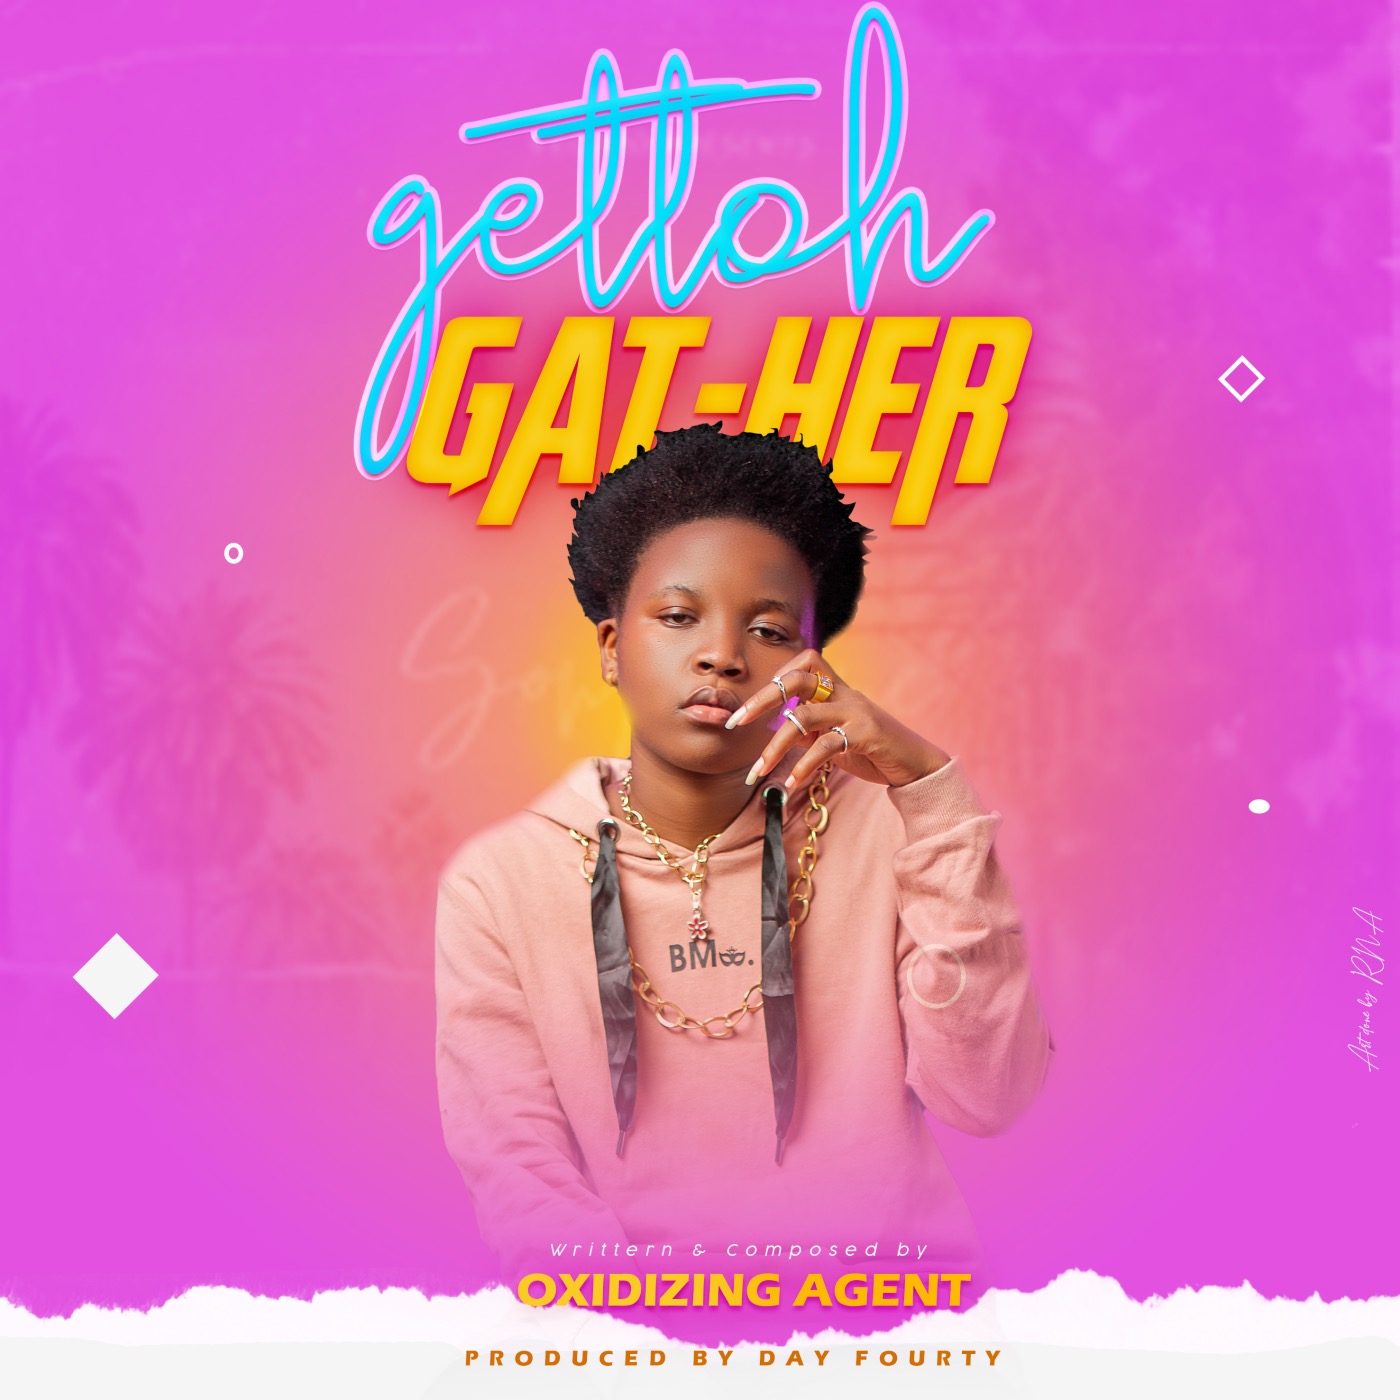 Oxidizing agent Gettoh Gat-Her prod by Fourty